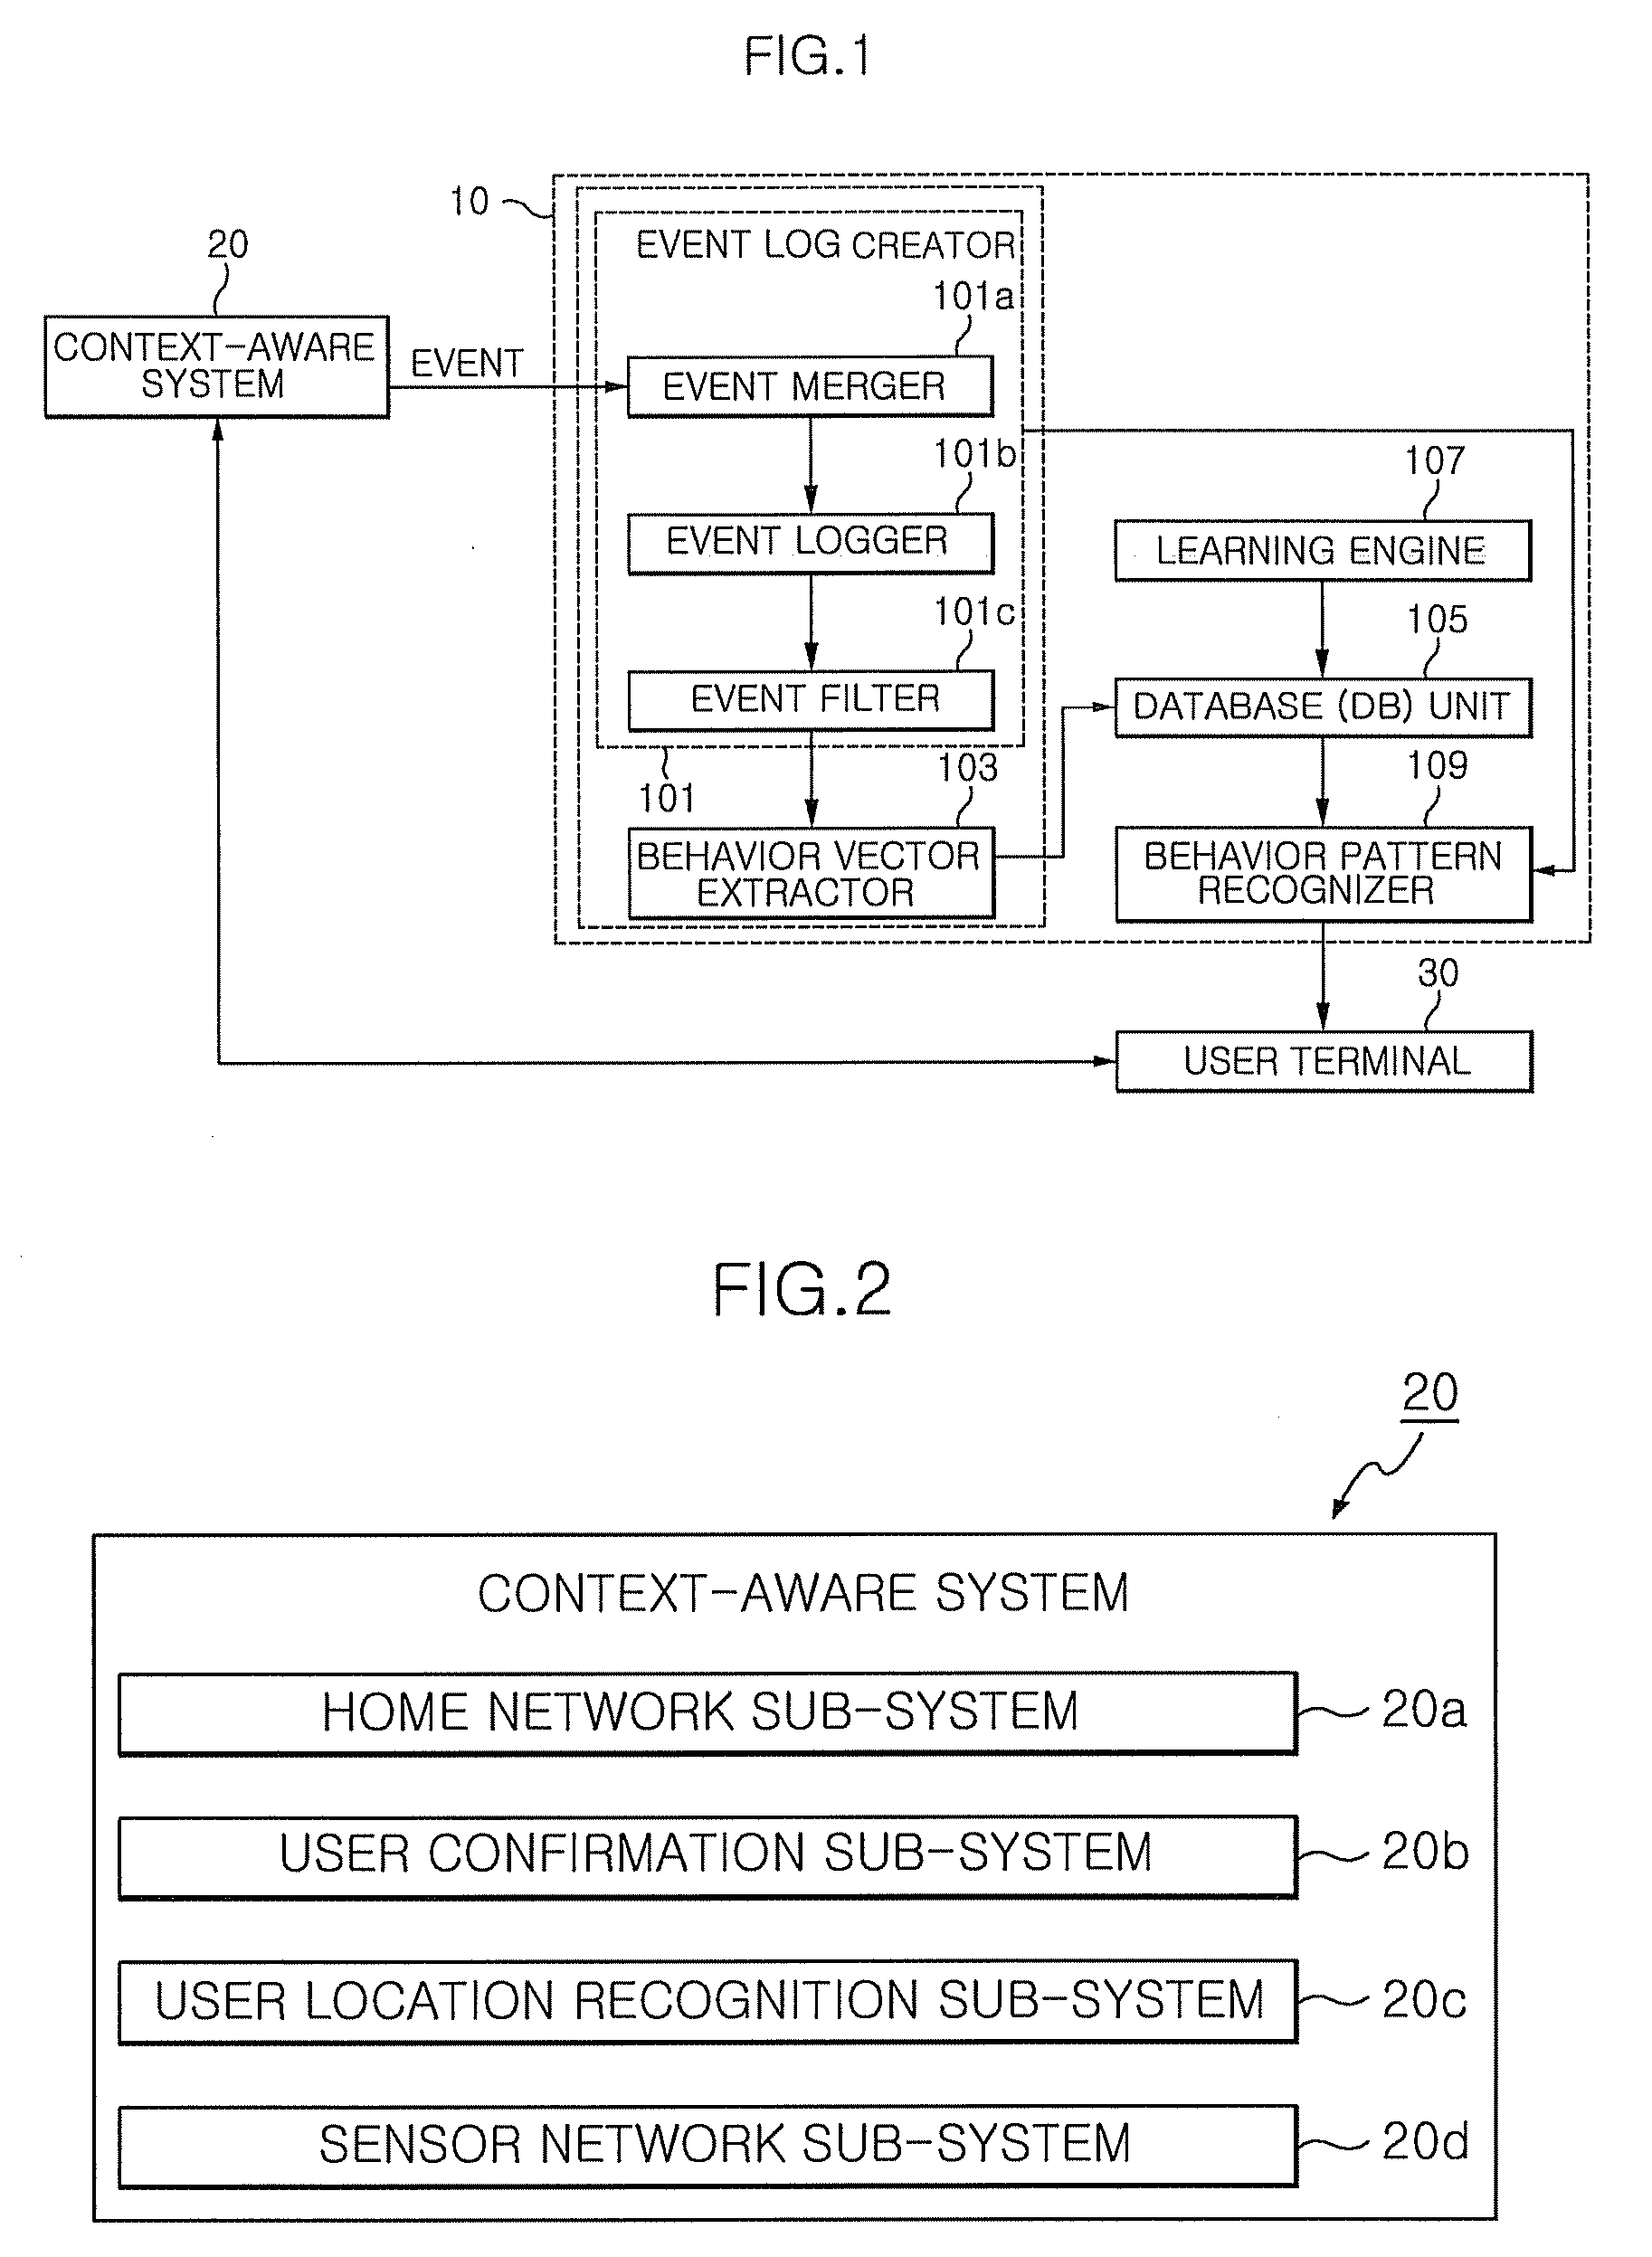 Apparatus and method of constructing user behavior pattern based on event log generated from context-aware system environment